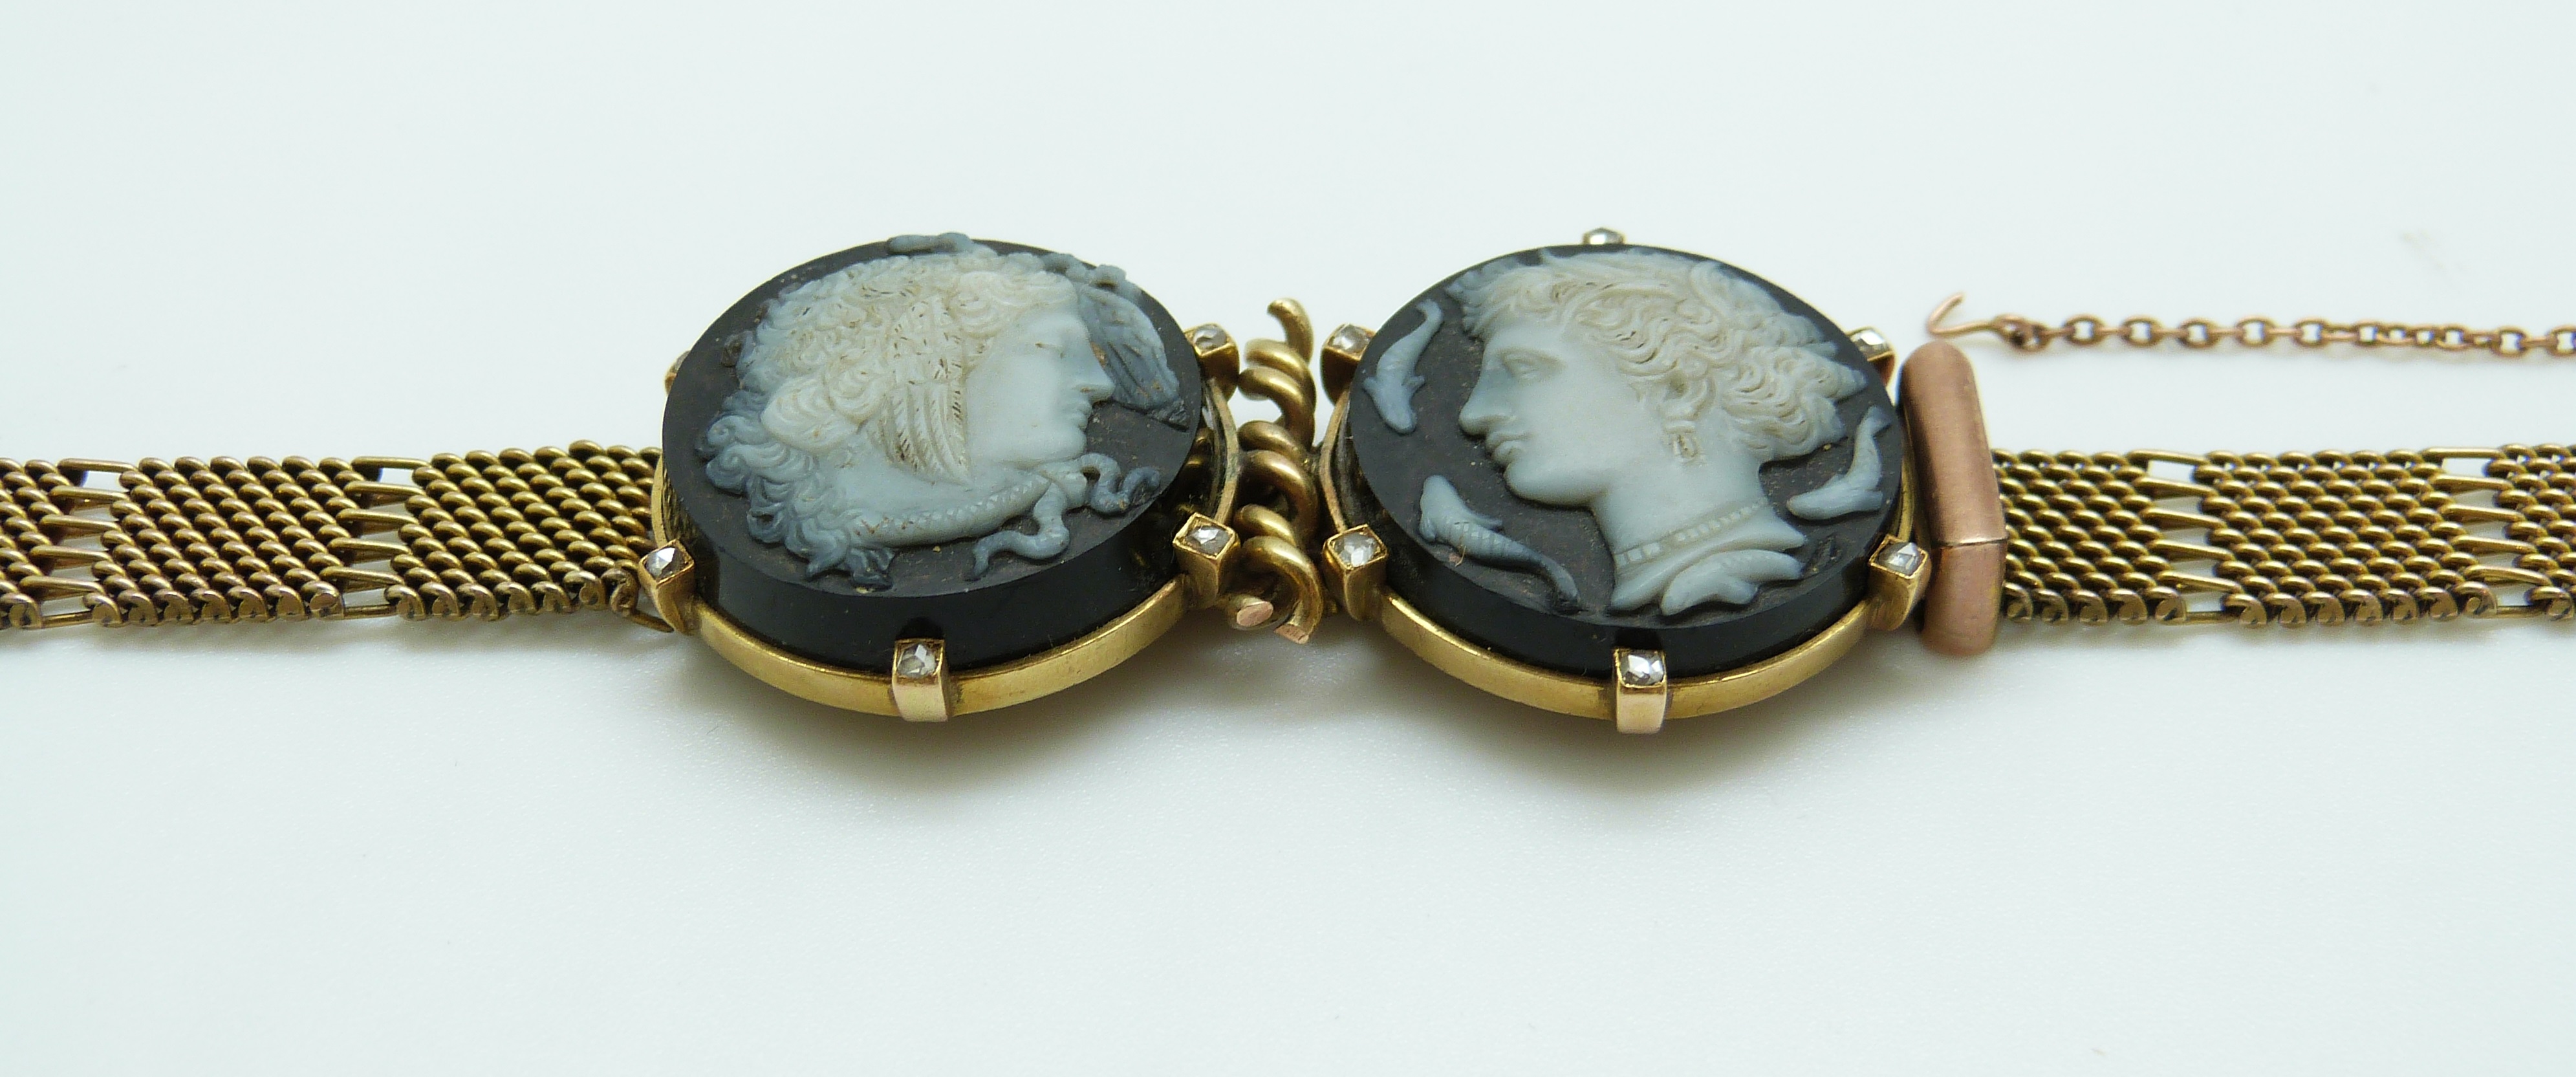 A 9ct gold Victorian bracelet set with two finely carved hardstone cameos depicting day and night, - Image 6 of 6